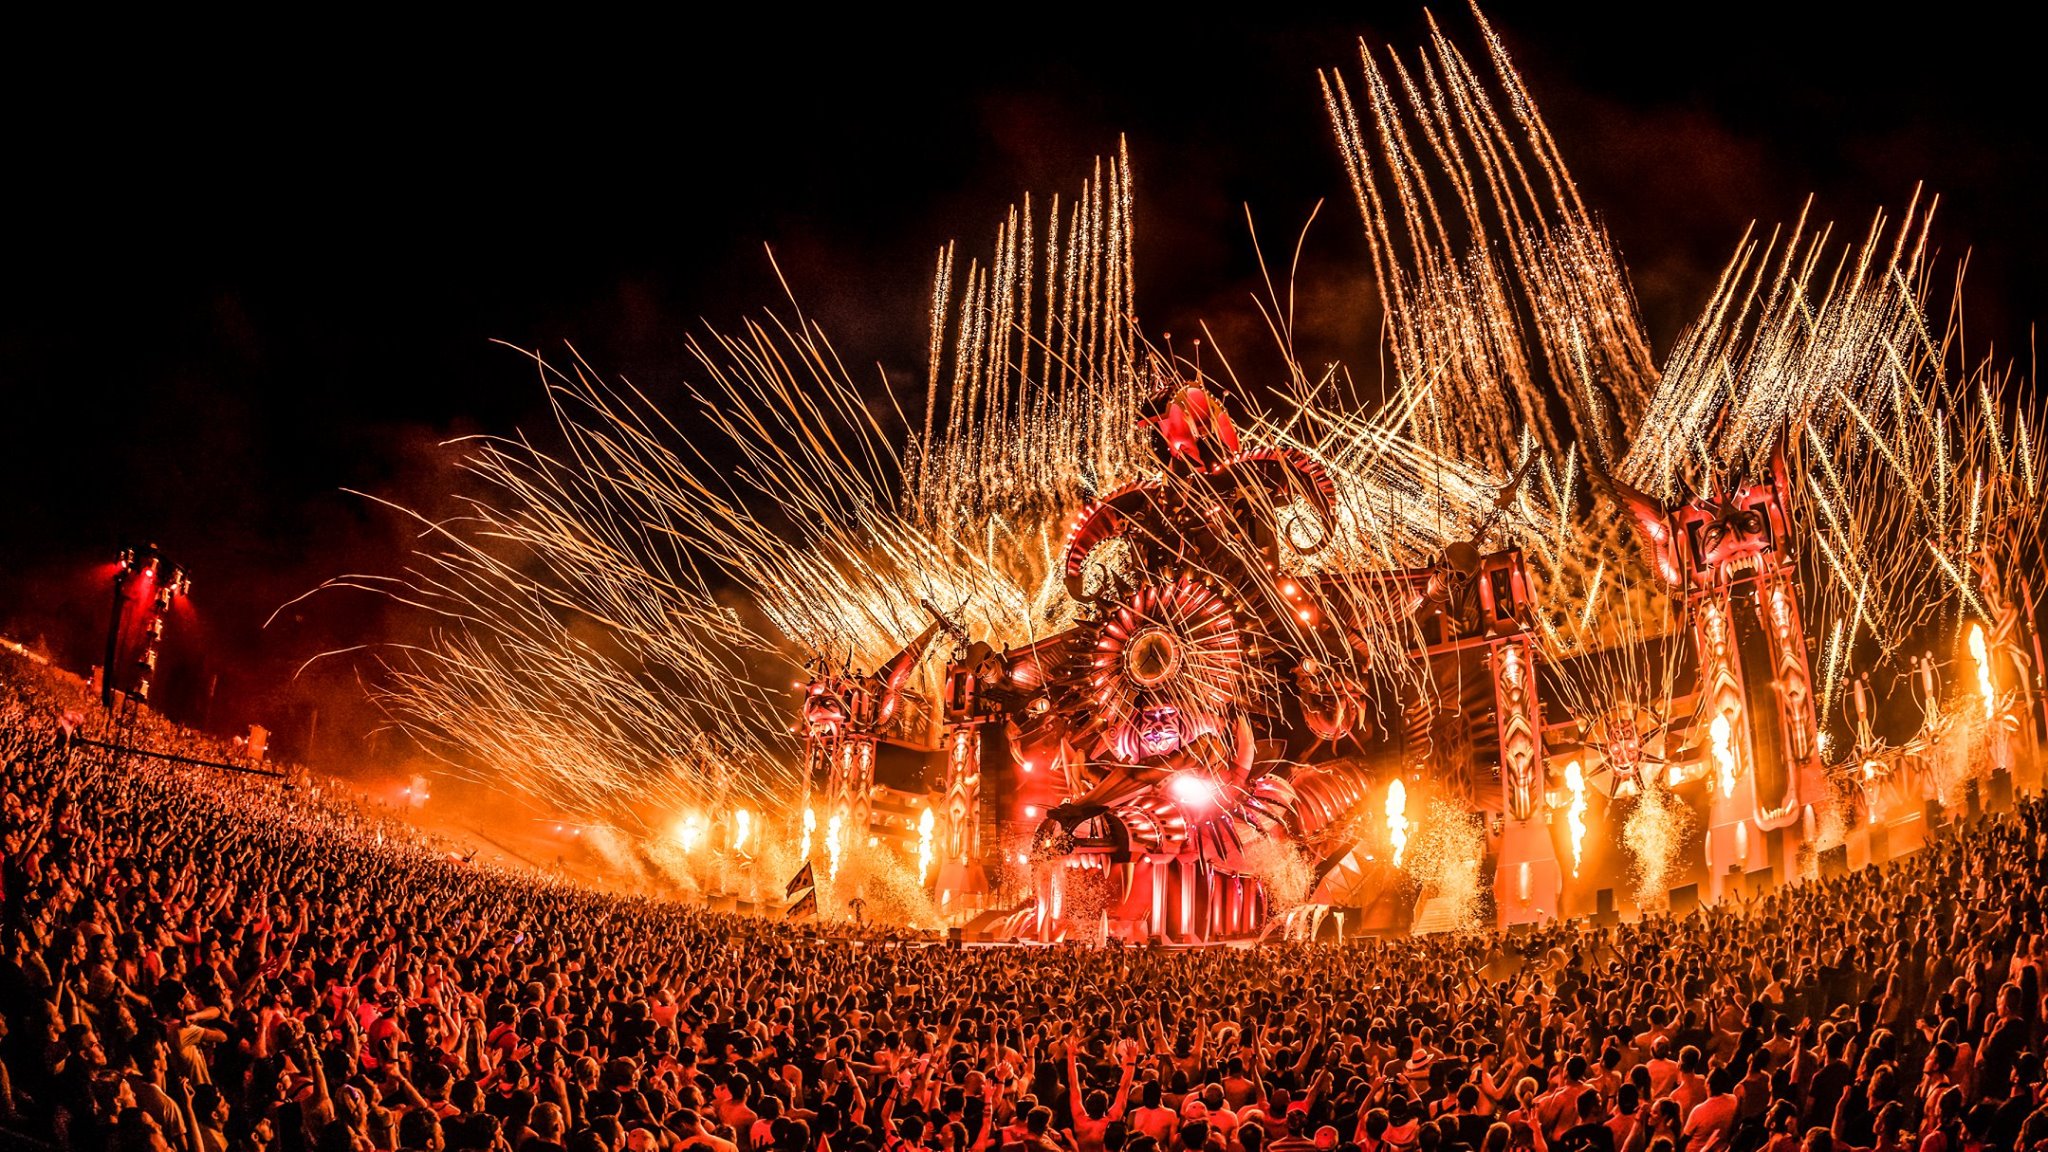 Defqon.1 Primal Energy Postponed to 2022 Due to COVID-19